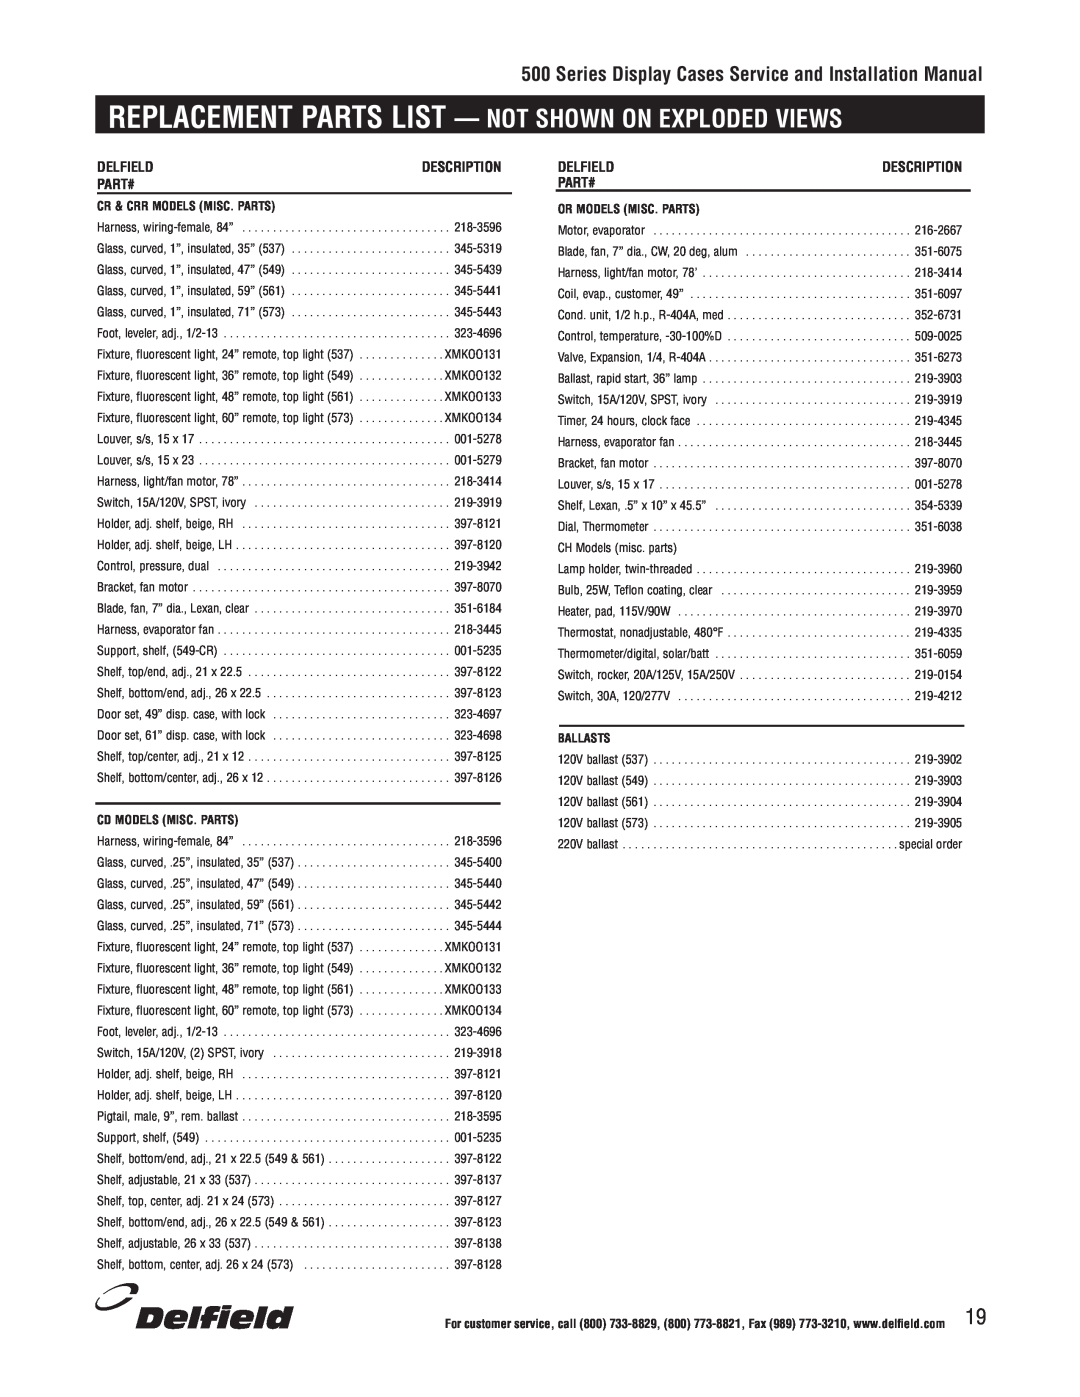 Delfield 500 Replacement Parts List - Not Shown On Exploded Views, Series Display Cases Service and Installation Manual 